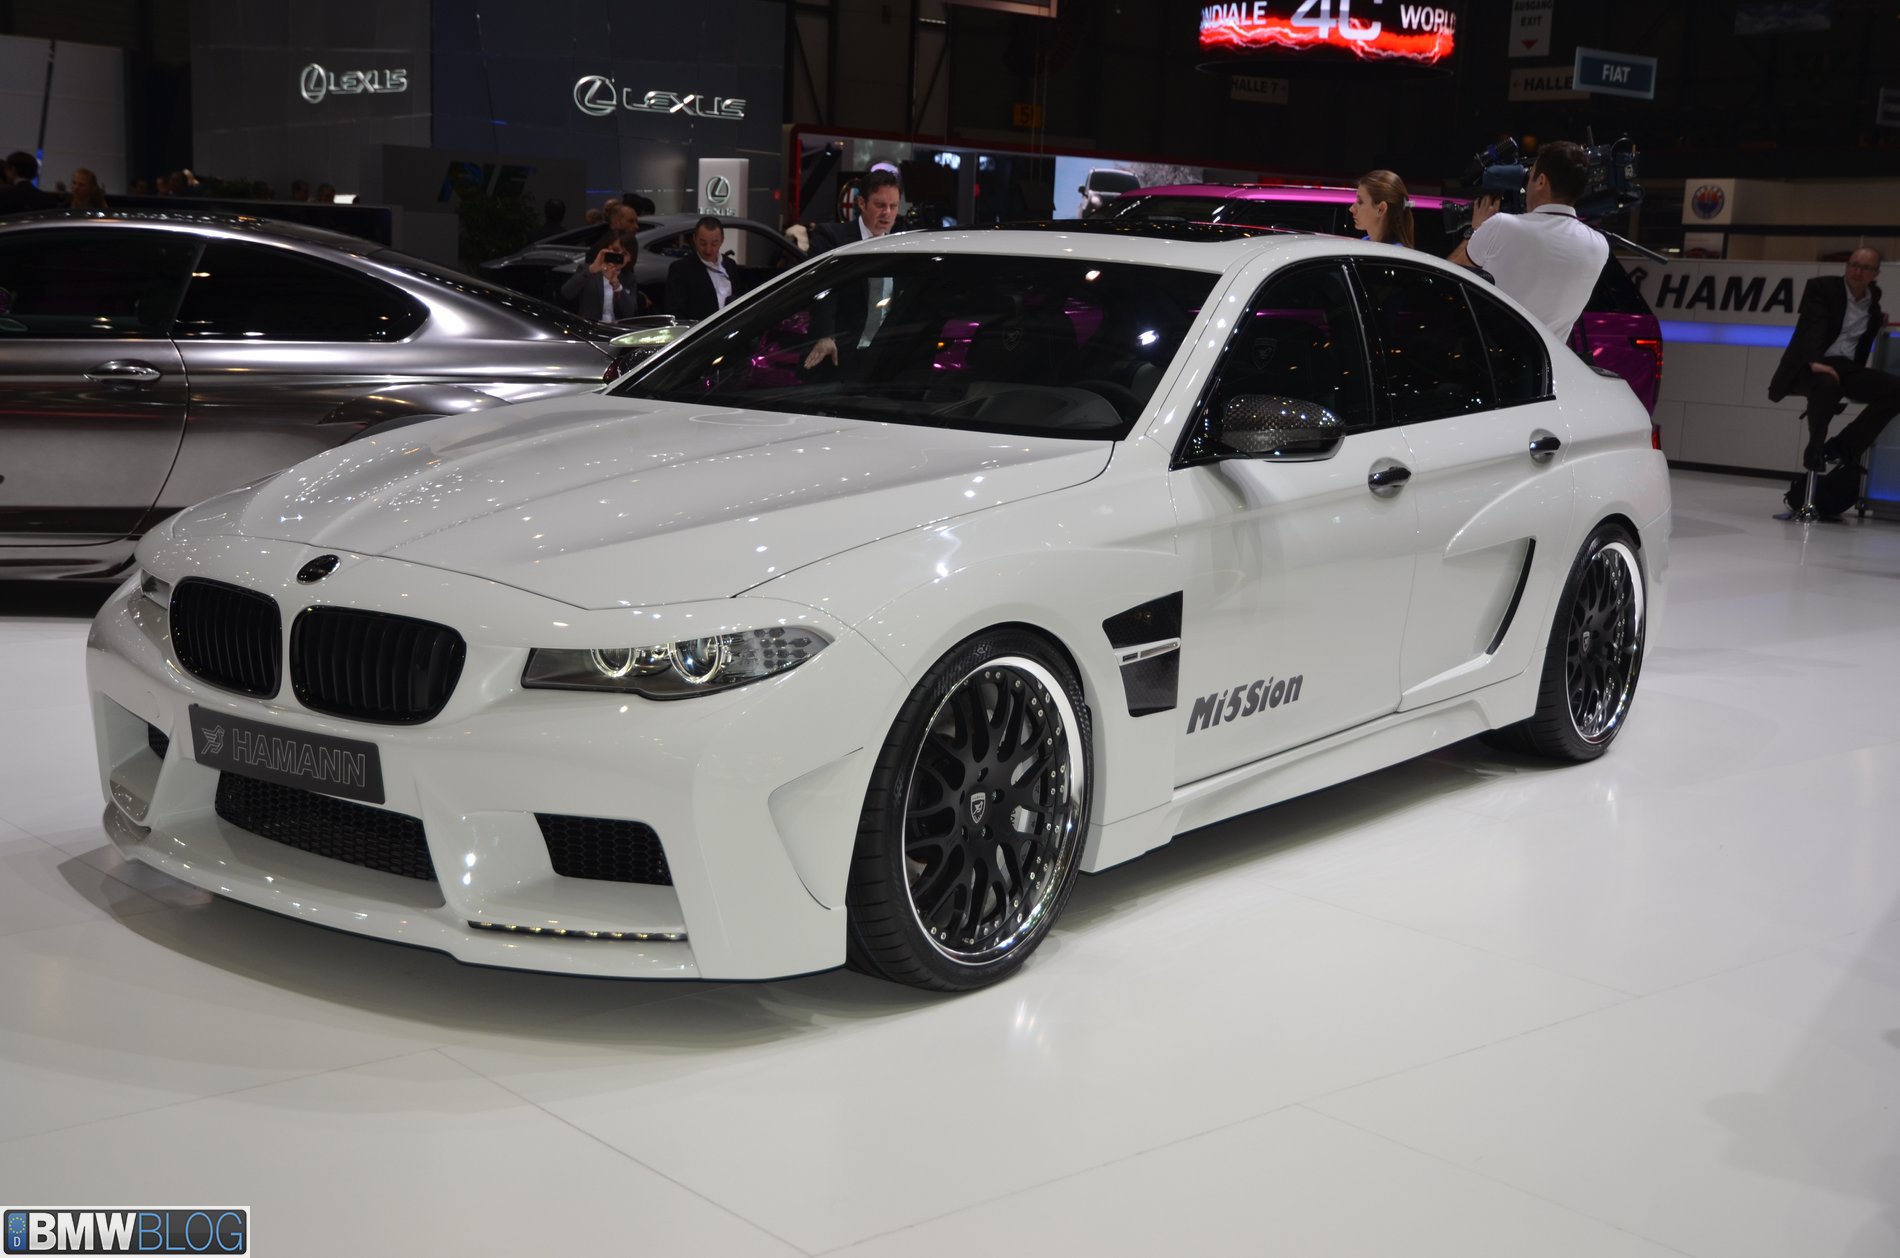 2013 Hamann Mi5sion up for grabs on  in the UK